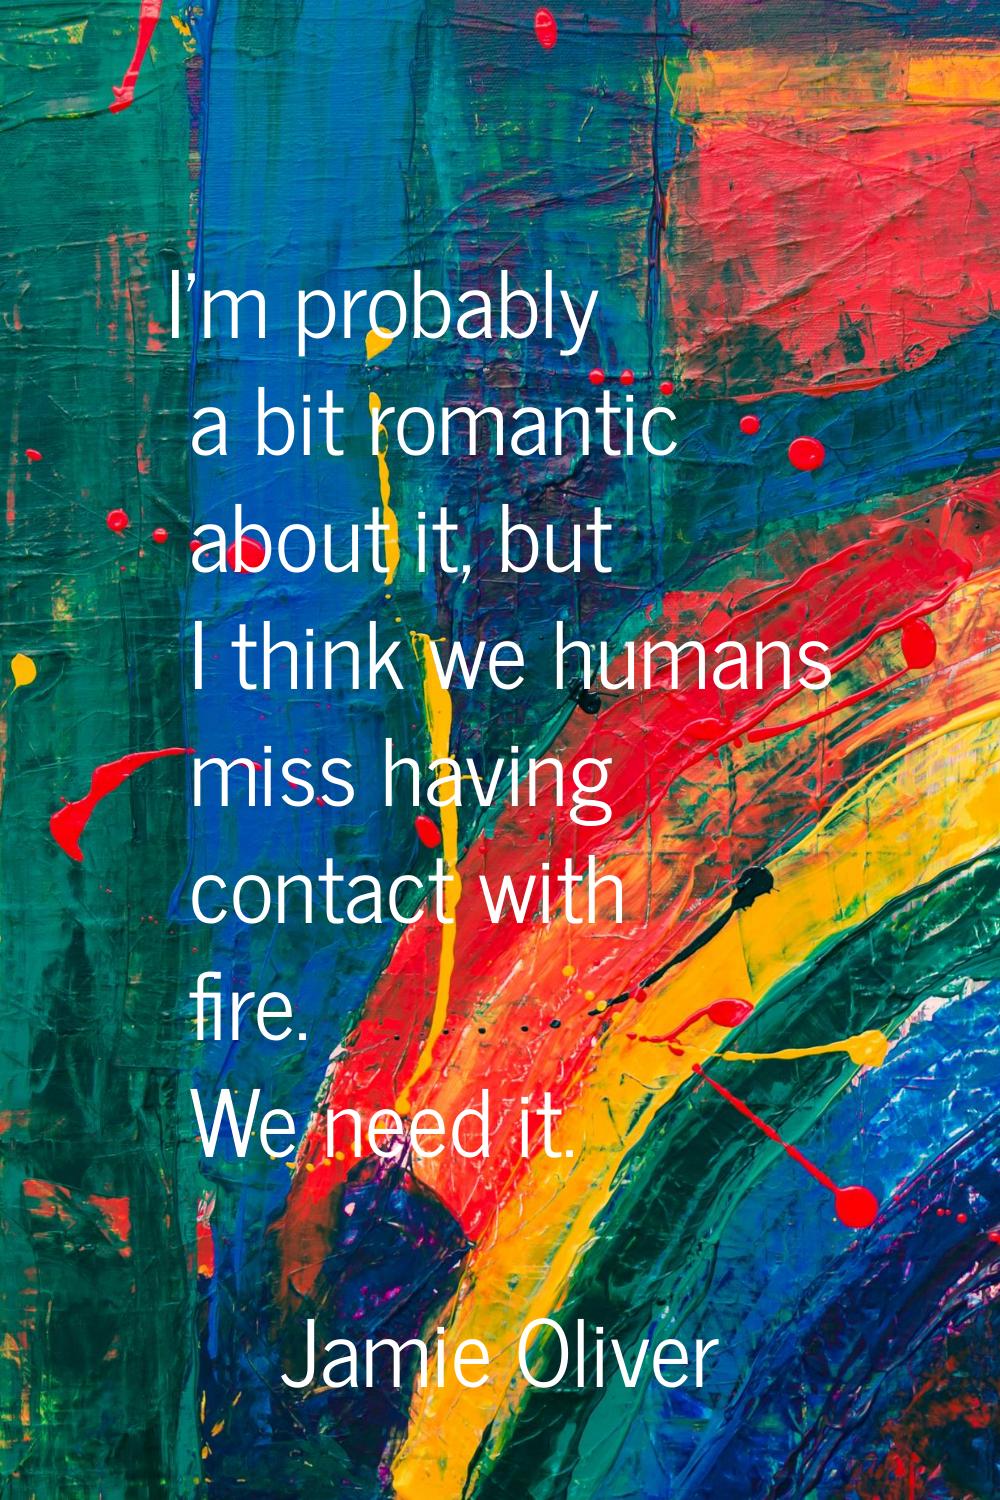 I'm probably a bit romantic about it, but I think we humans miss having contact with fire. We need 